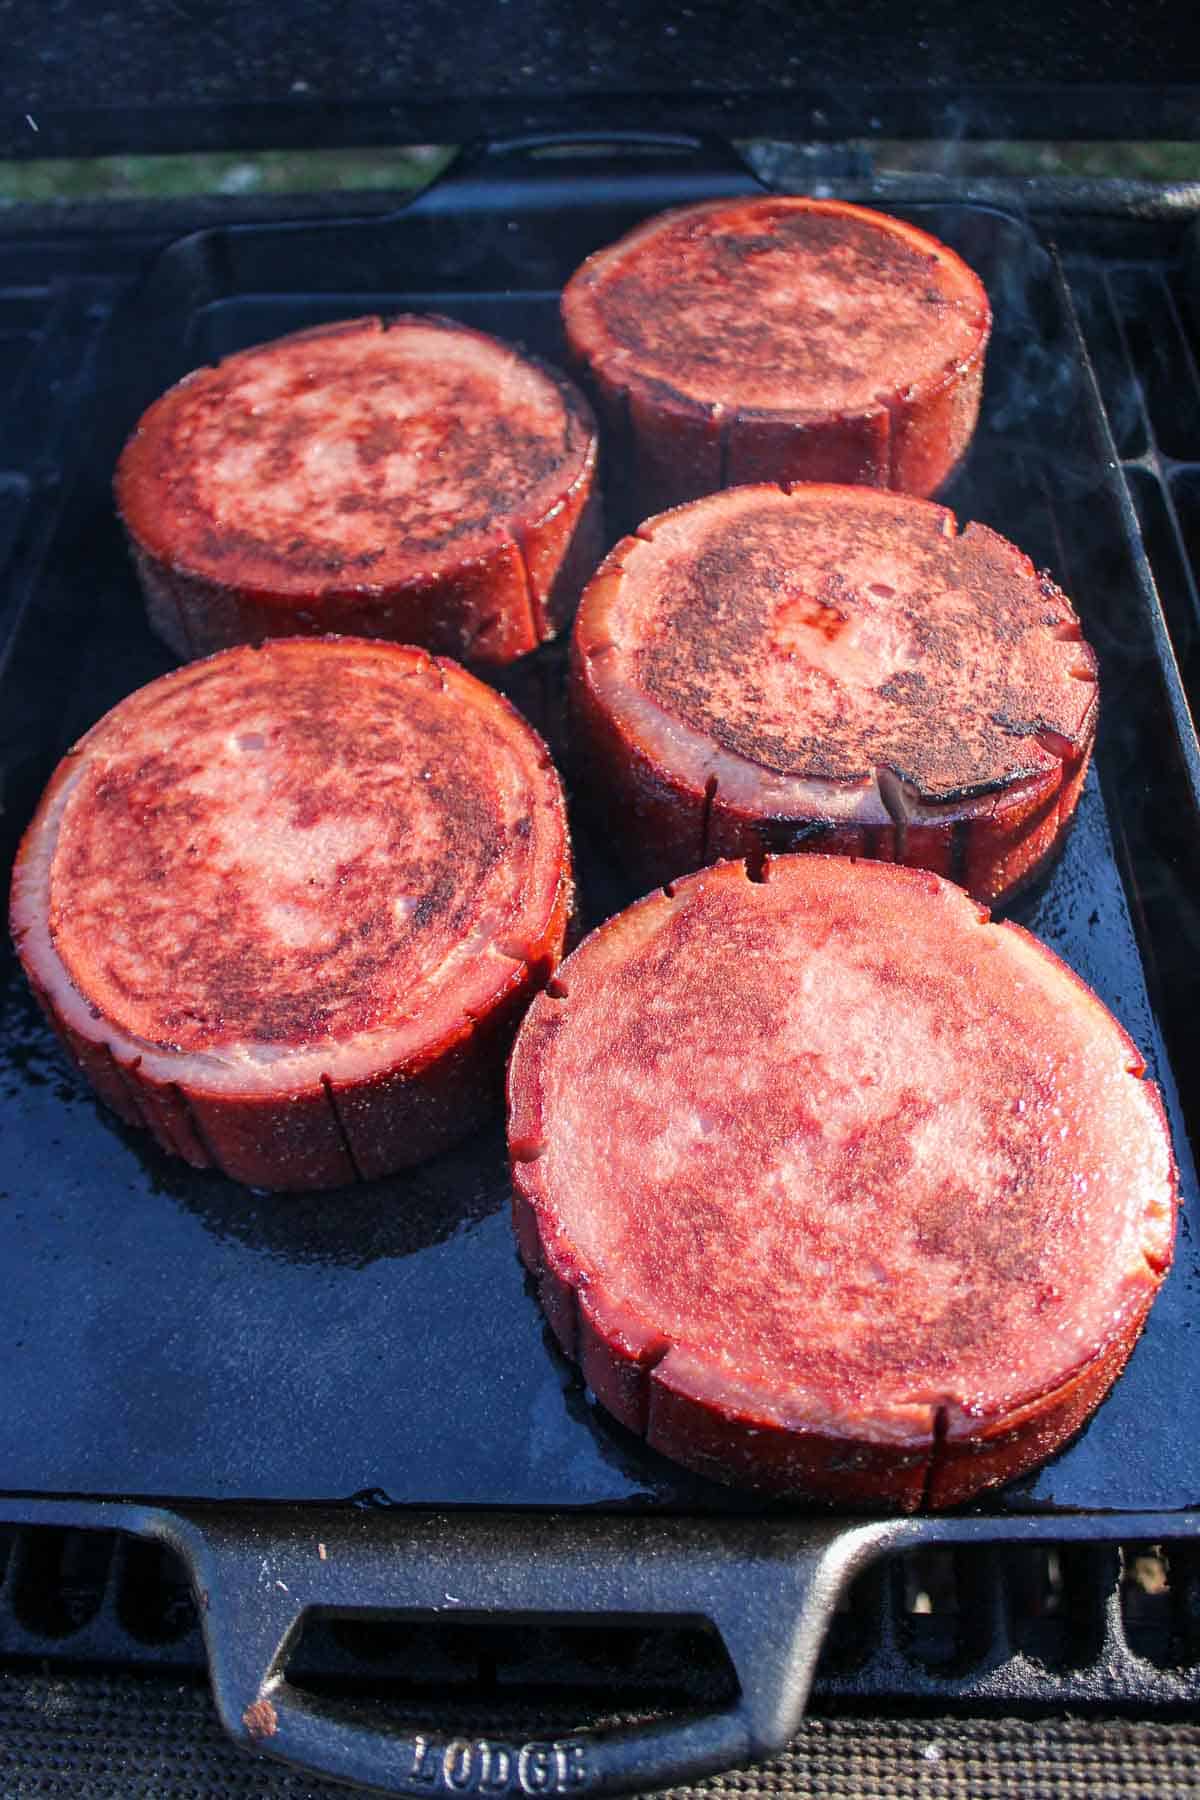 The bologna slices after being flipped on the grill.